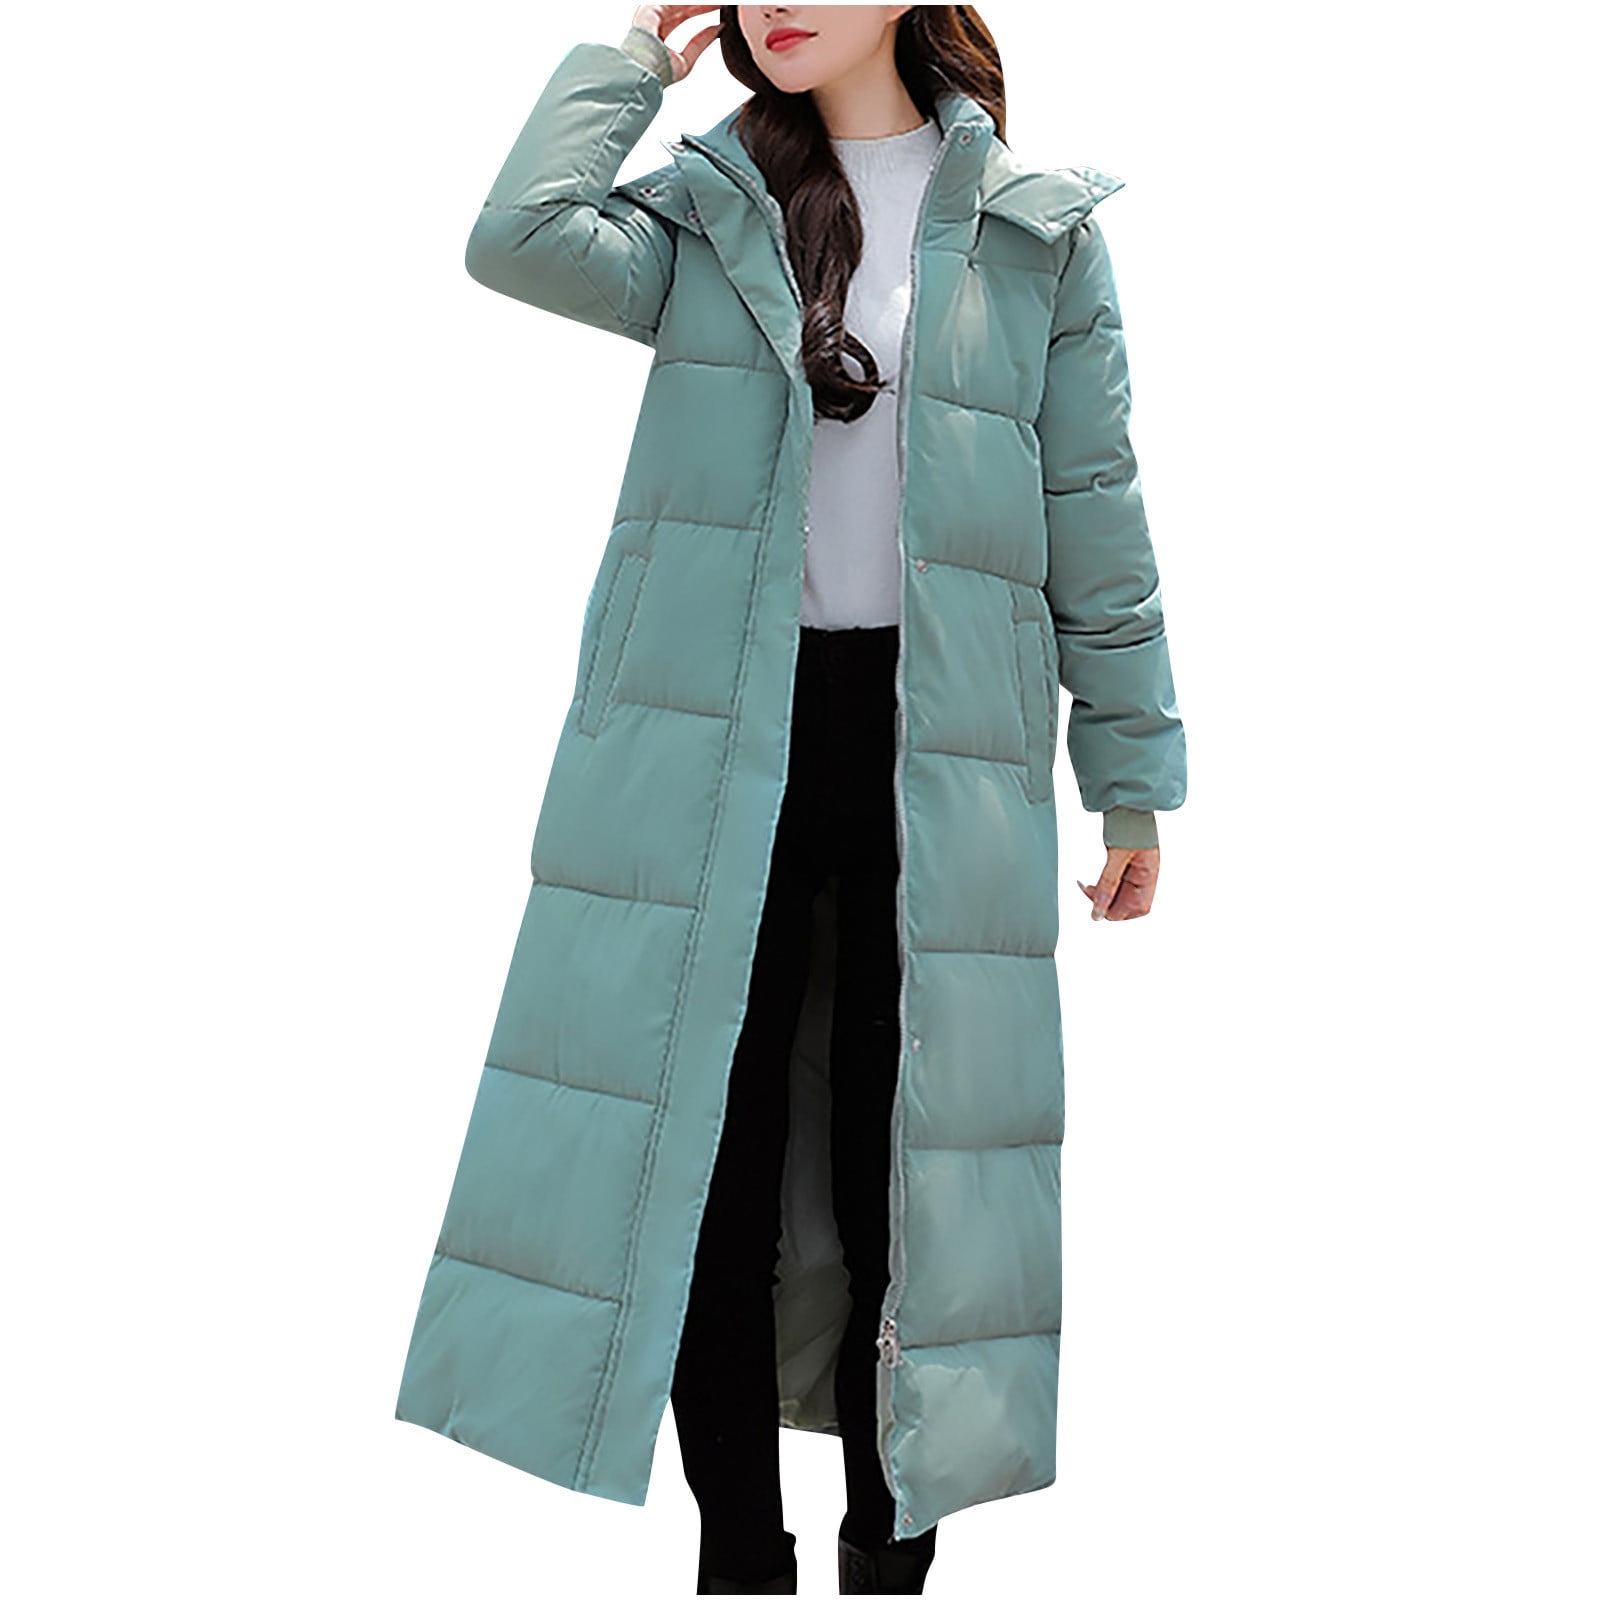 Flash Sales for Today ! BVnarty Women's Jacket Coat Zipper Bomber Jacket  Winter Fashion Top Solid Color Notched Lapel Long Sleeve Lightweight Plus